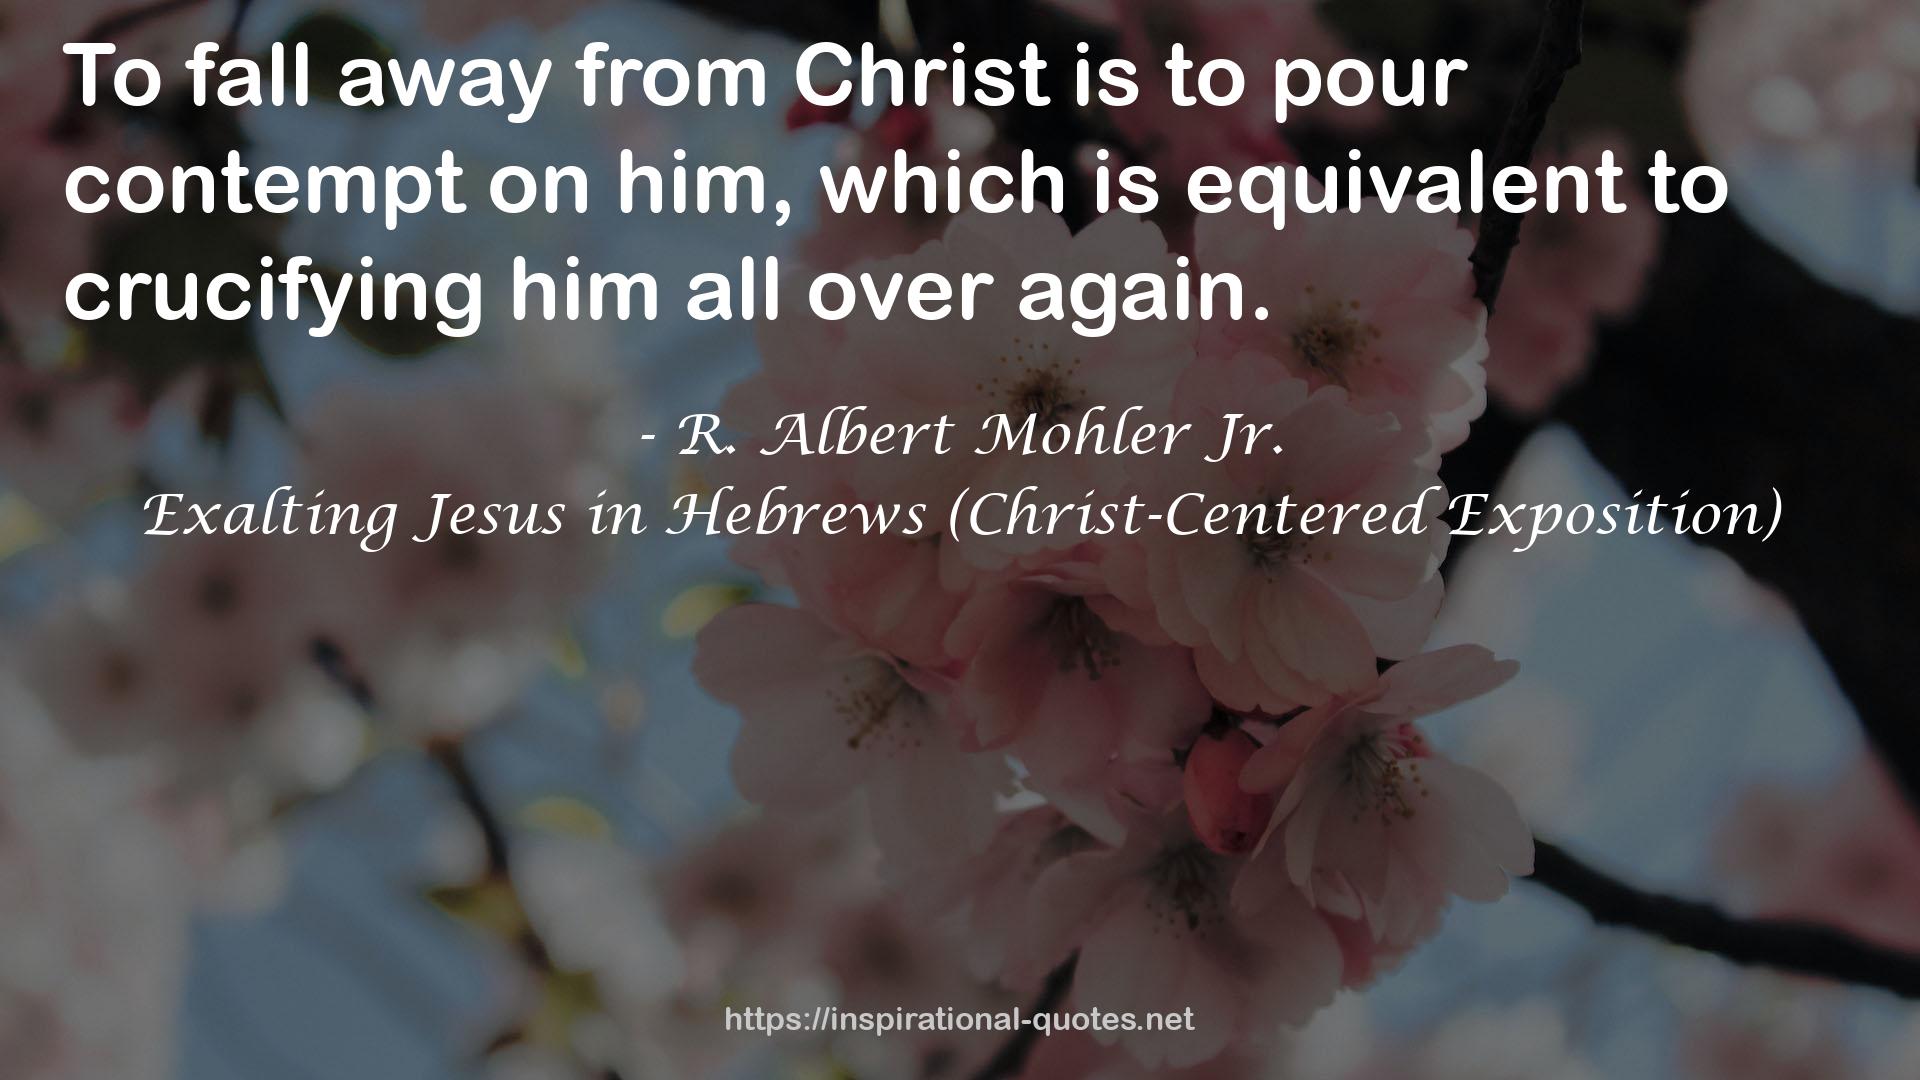 Exalting Jesus in Hebrews (Christ-Centered Exposition) QUOTES